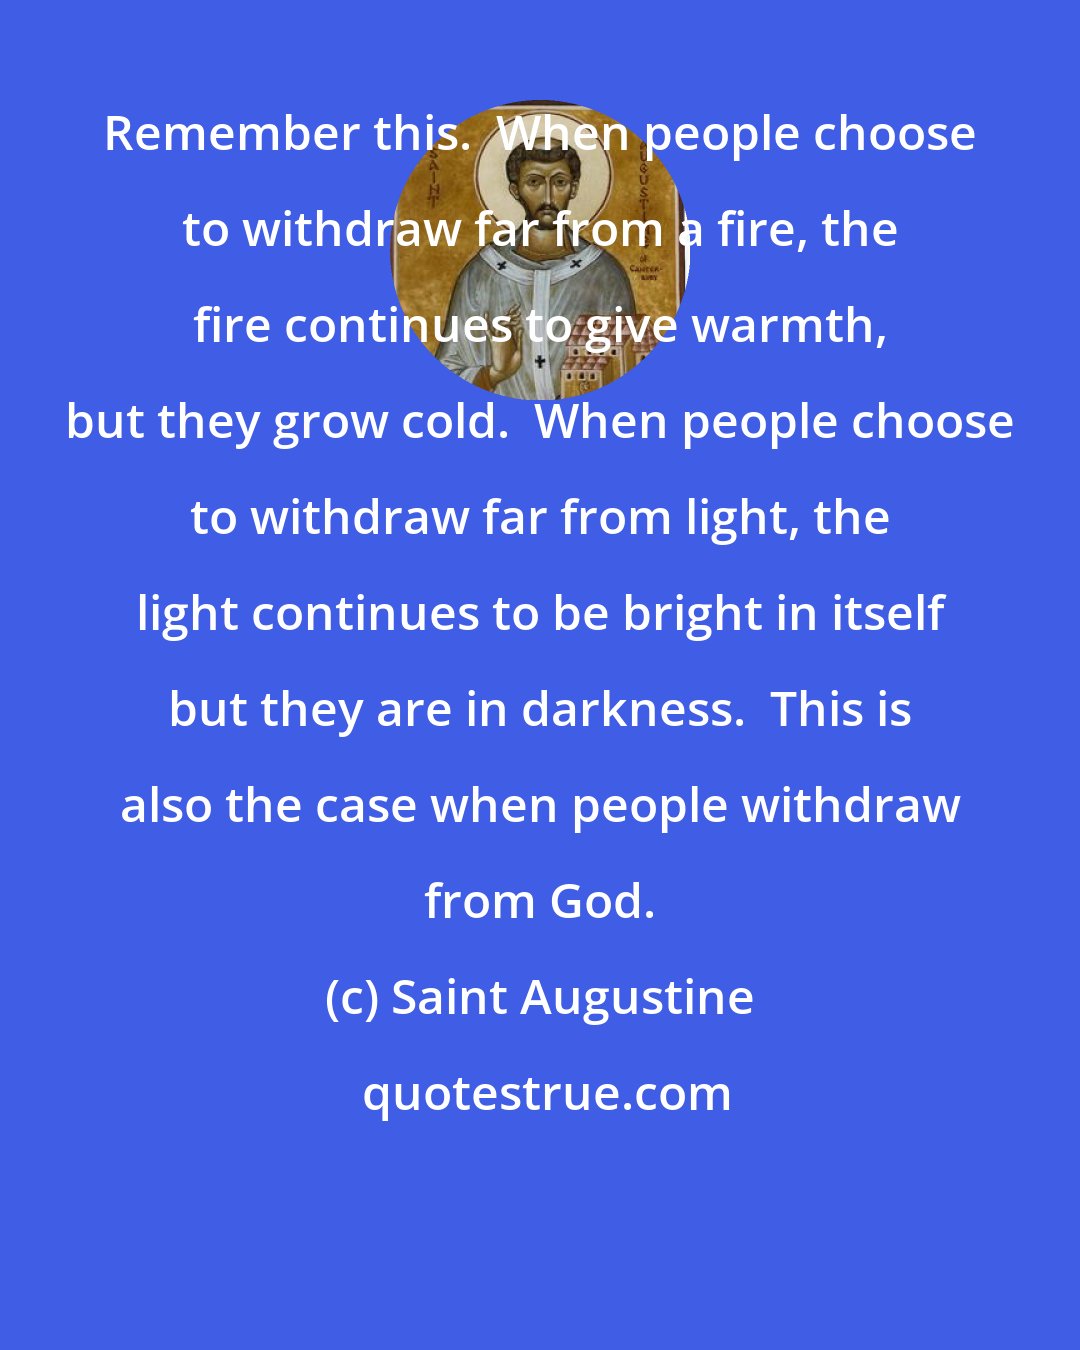 Saint Augustine: Remember this.  When people choose to withdraw far from a fire, the fire continues to give warmth, but they grow cold.  When people choose to withdraw far from light, the light continues to be bright in itself but they are in darkness.  This is also the case when people withdraw from God.